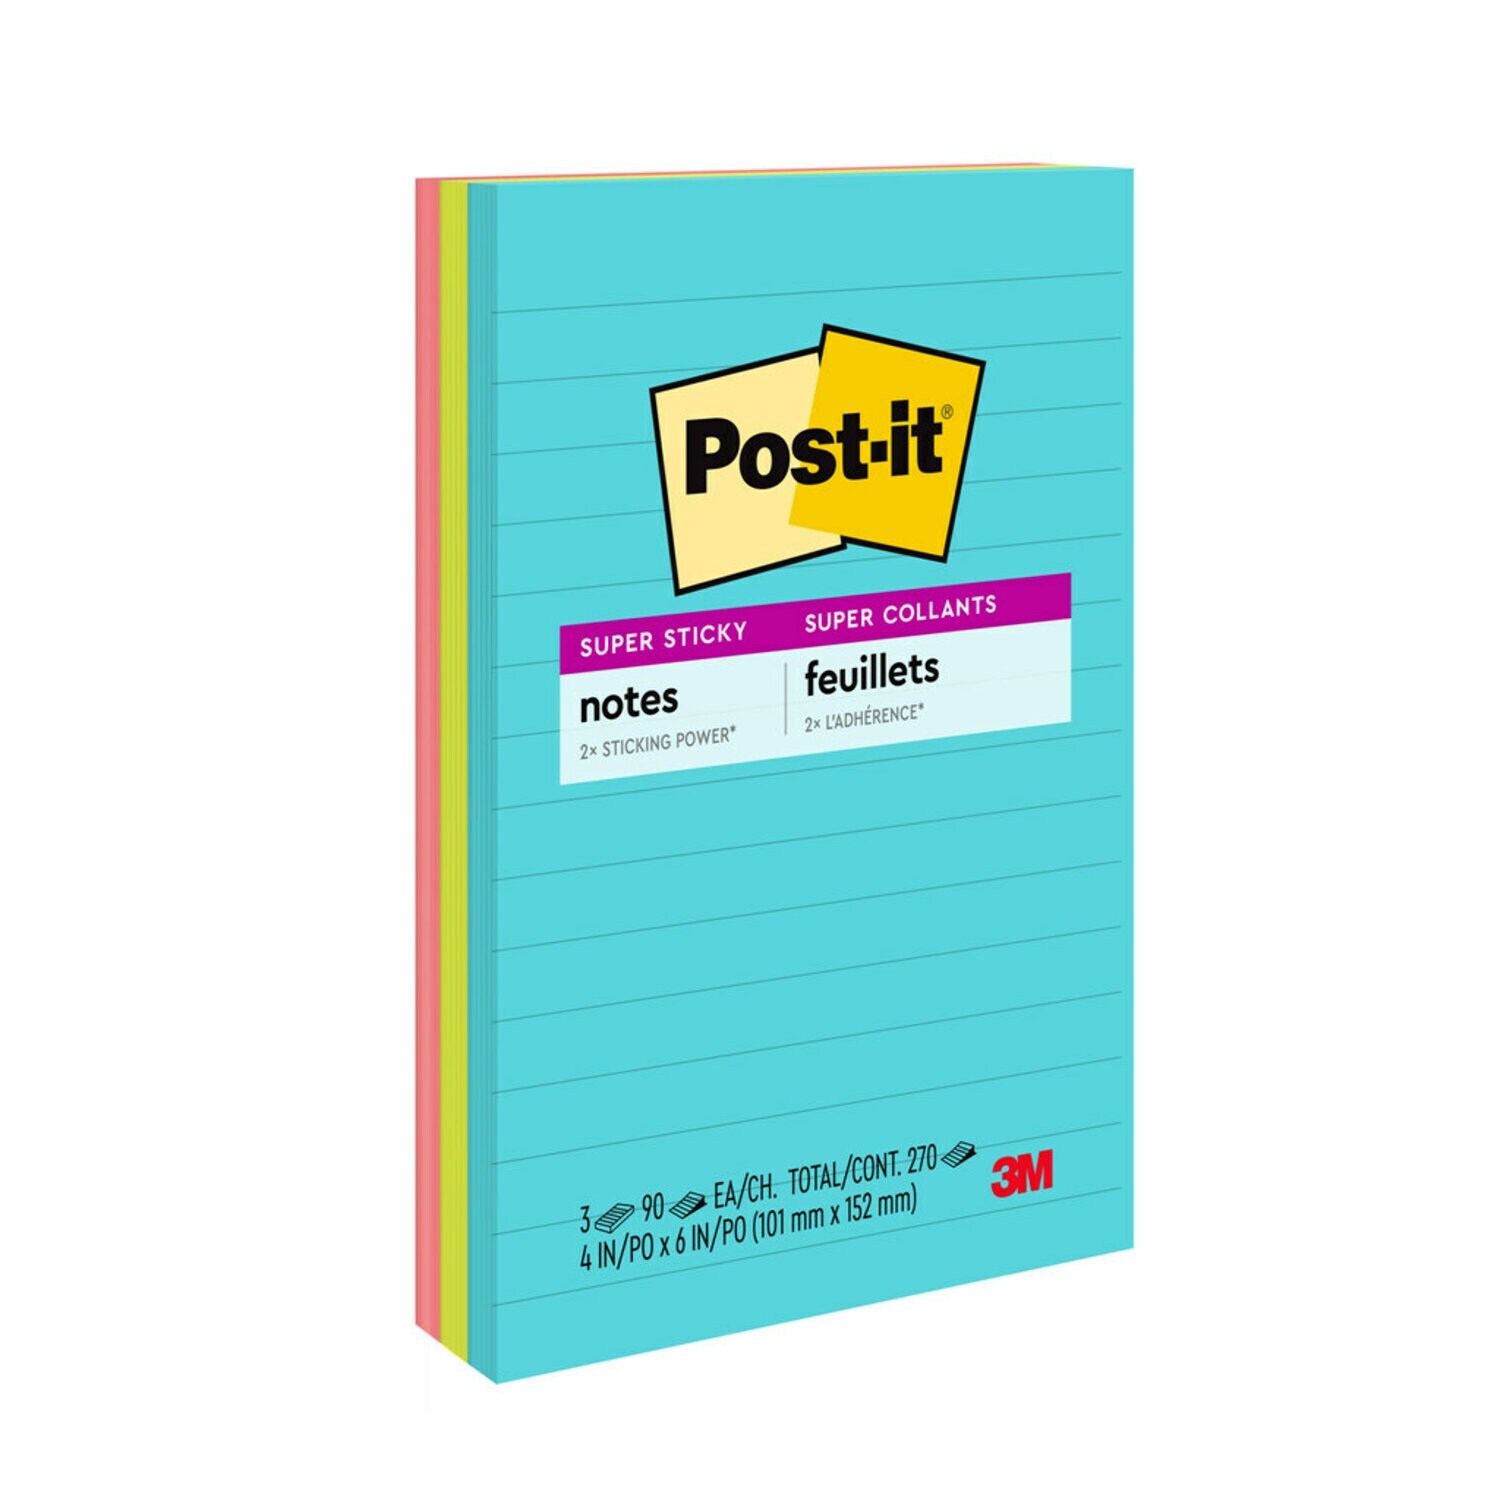 7100088532 - Post-it Super Sticky Notes 660-3SSMIA, 4 in x 6 in (101 mm x 152 mm),
Miami Collection, 3 Pads/Pack, 90 Sheets/Pad, Lined